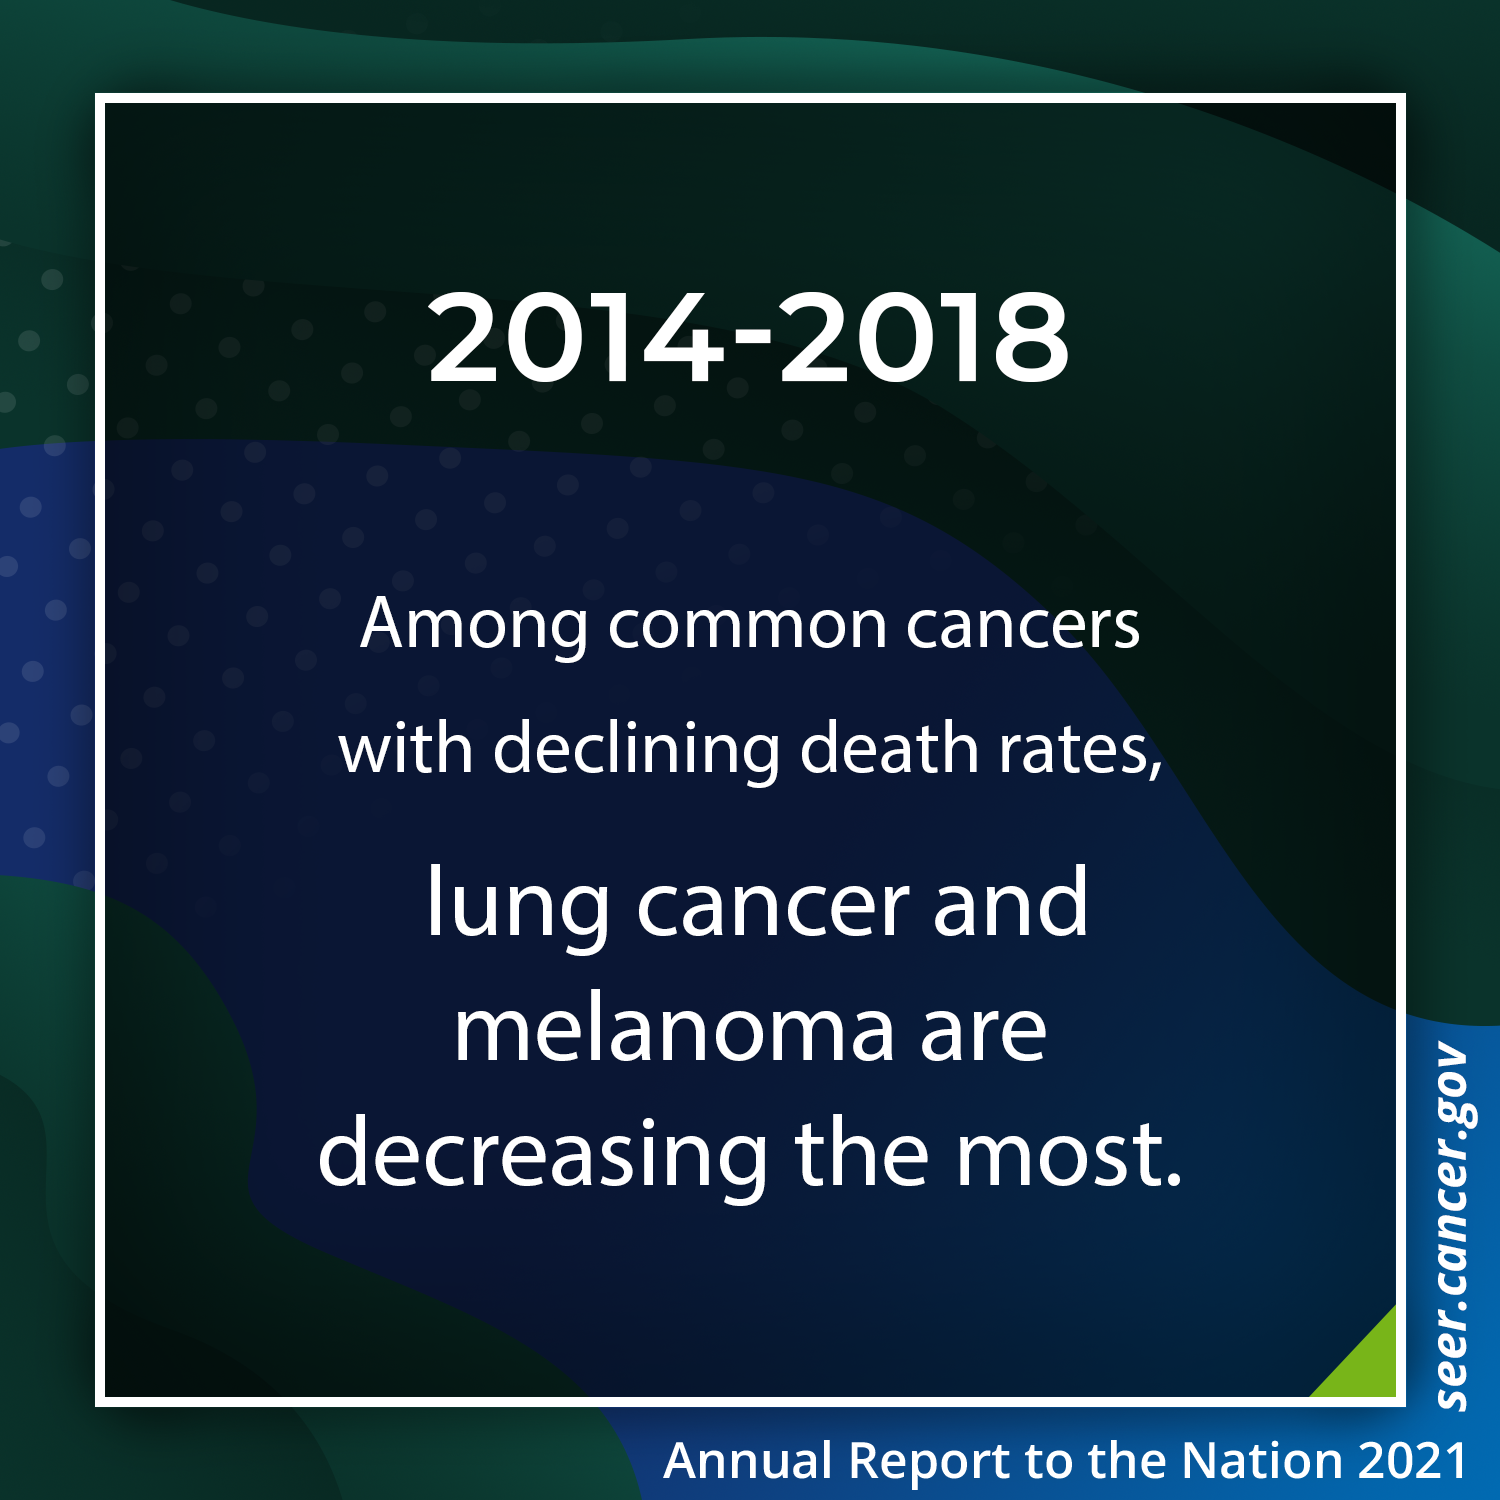 Cancer death rates declined for men and women